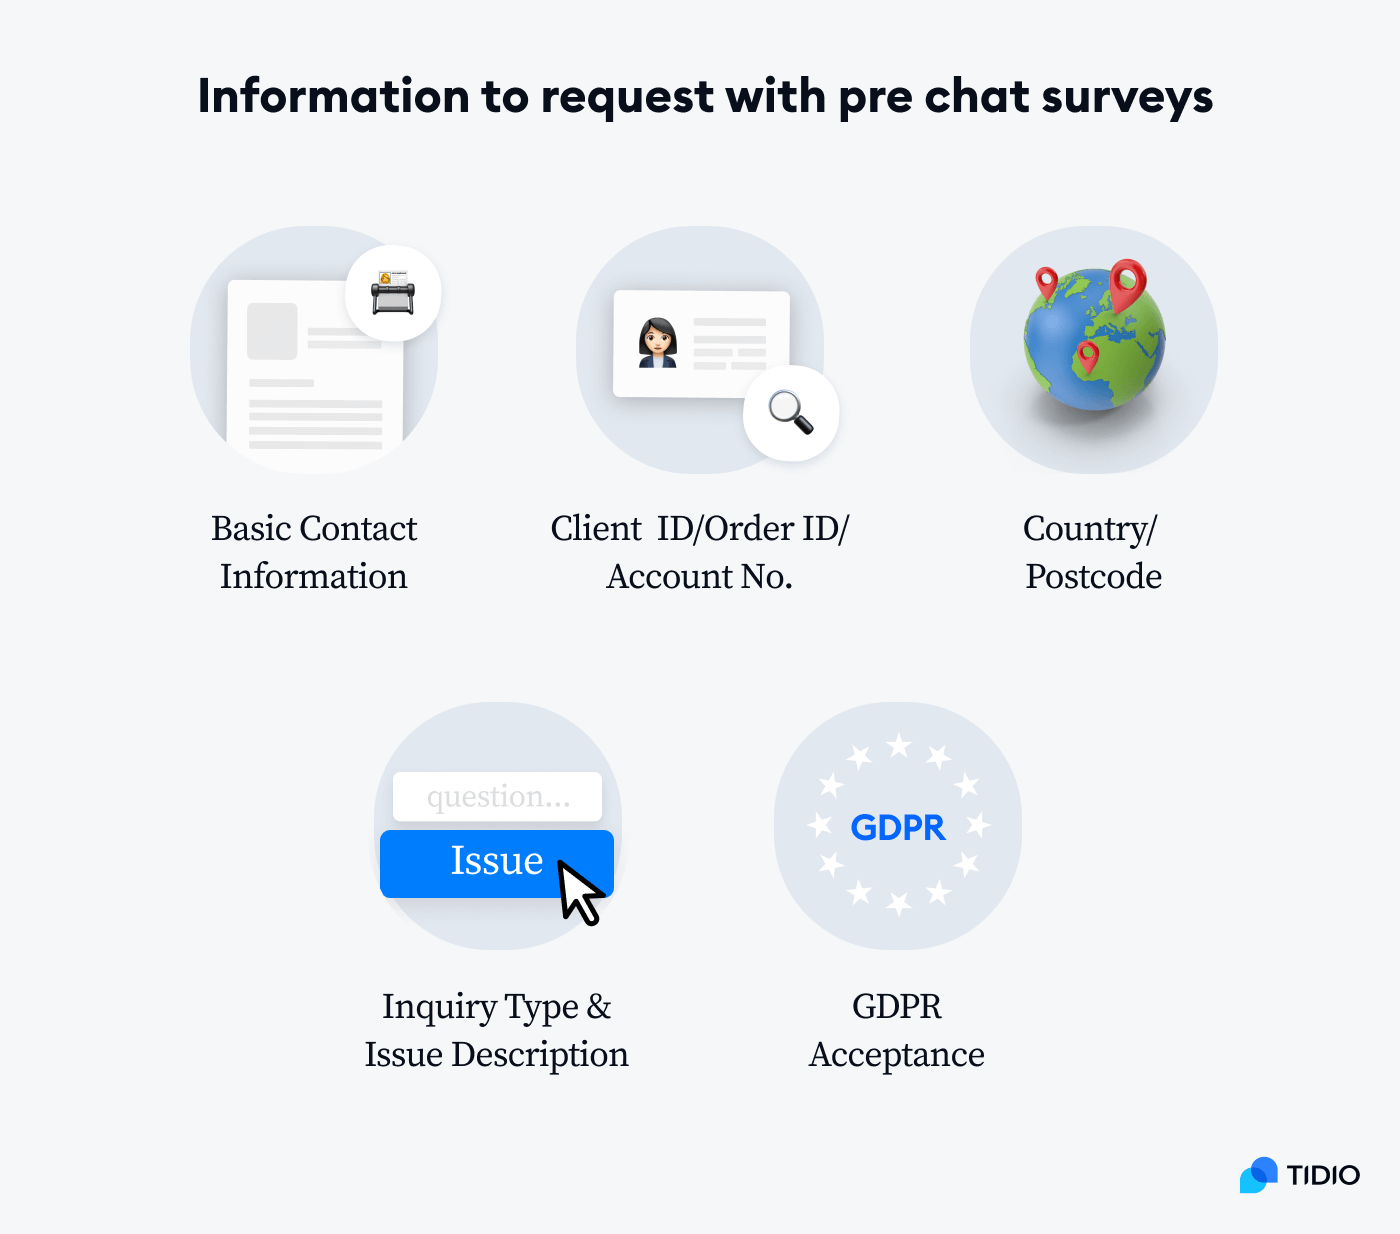 Pre-chat surveys: information to request on image